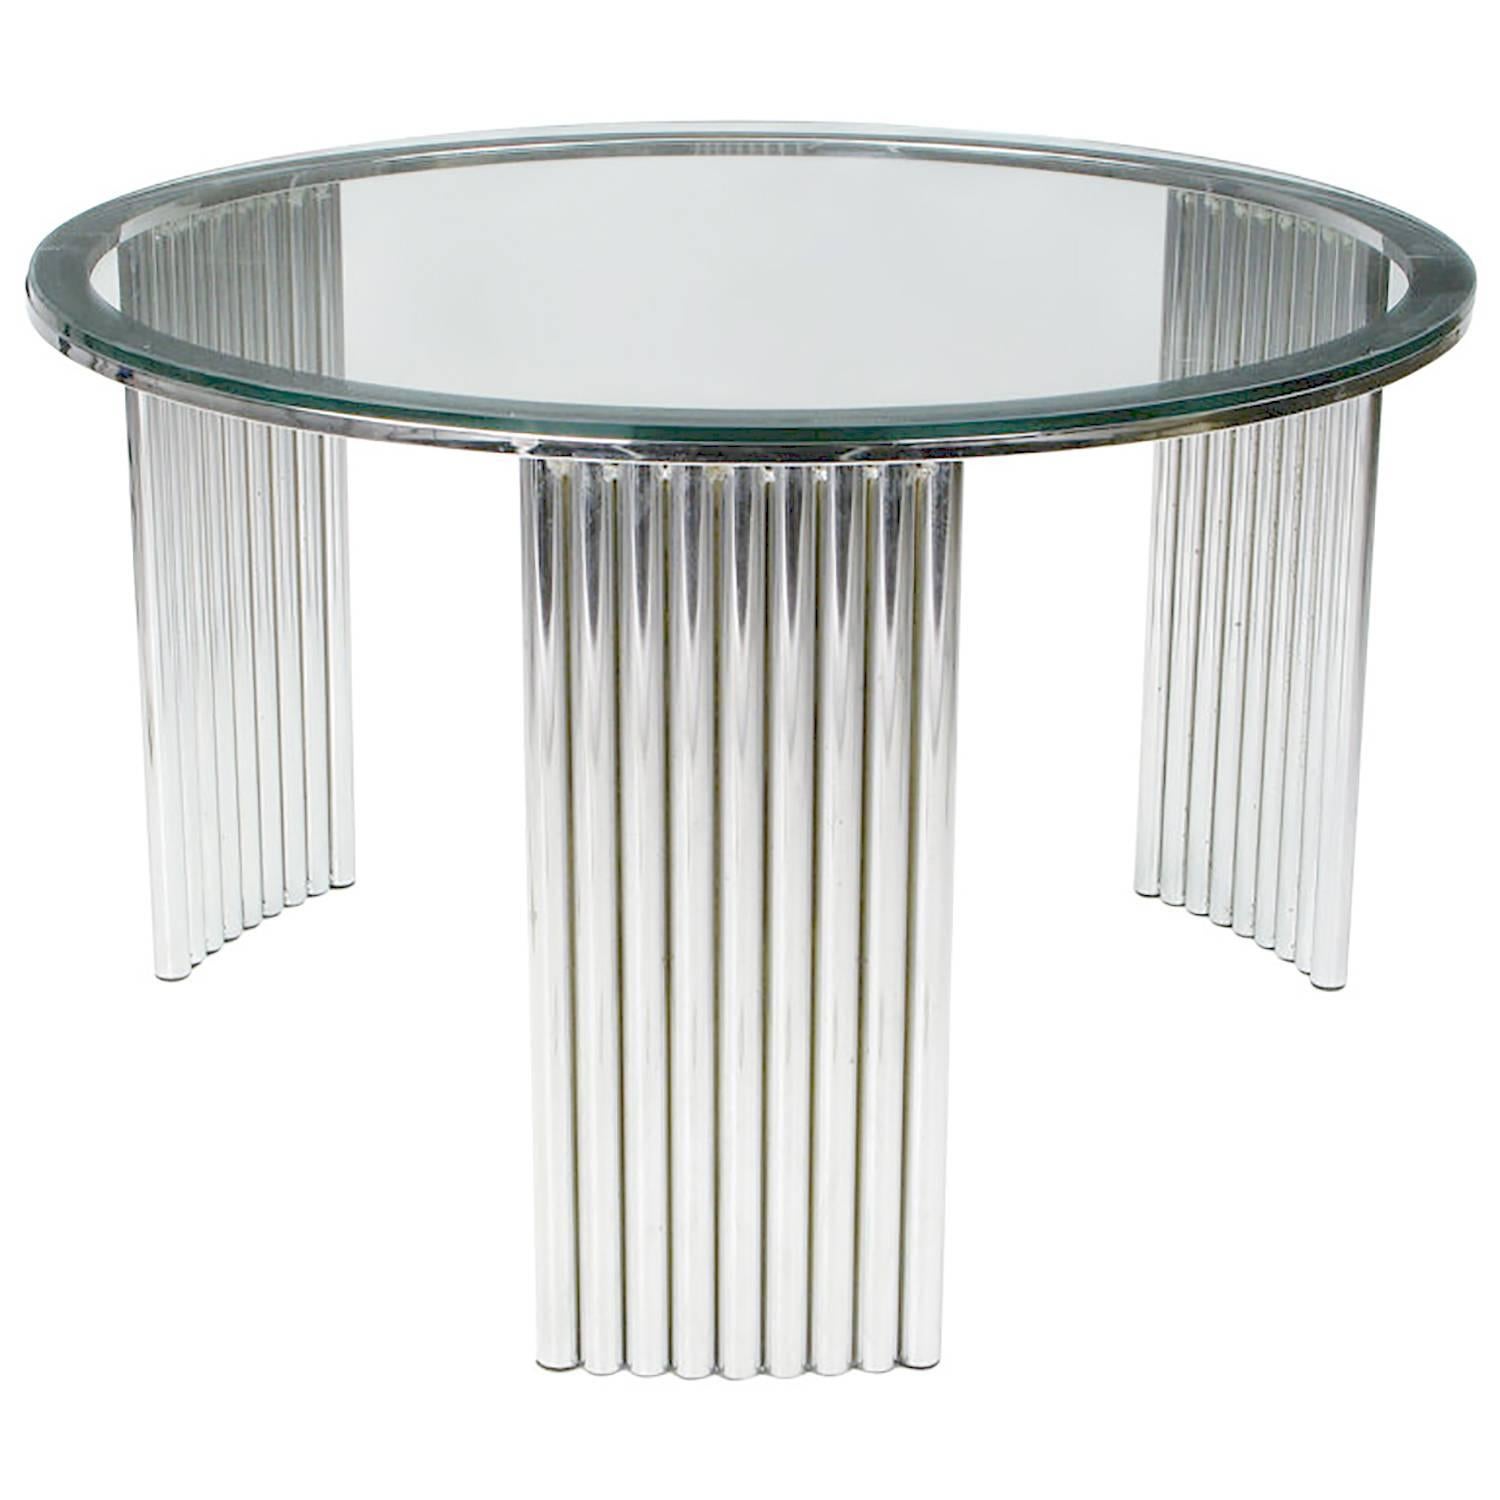 27 welded and chromed tubes form the three radius supports for this deco-Futurist coffee table, which would also work well as a large end table. The 3/8